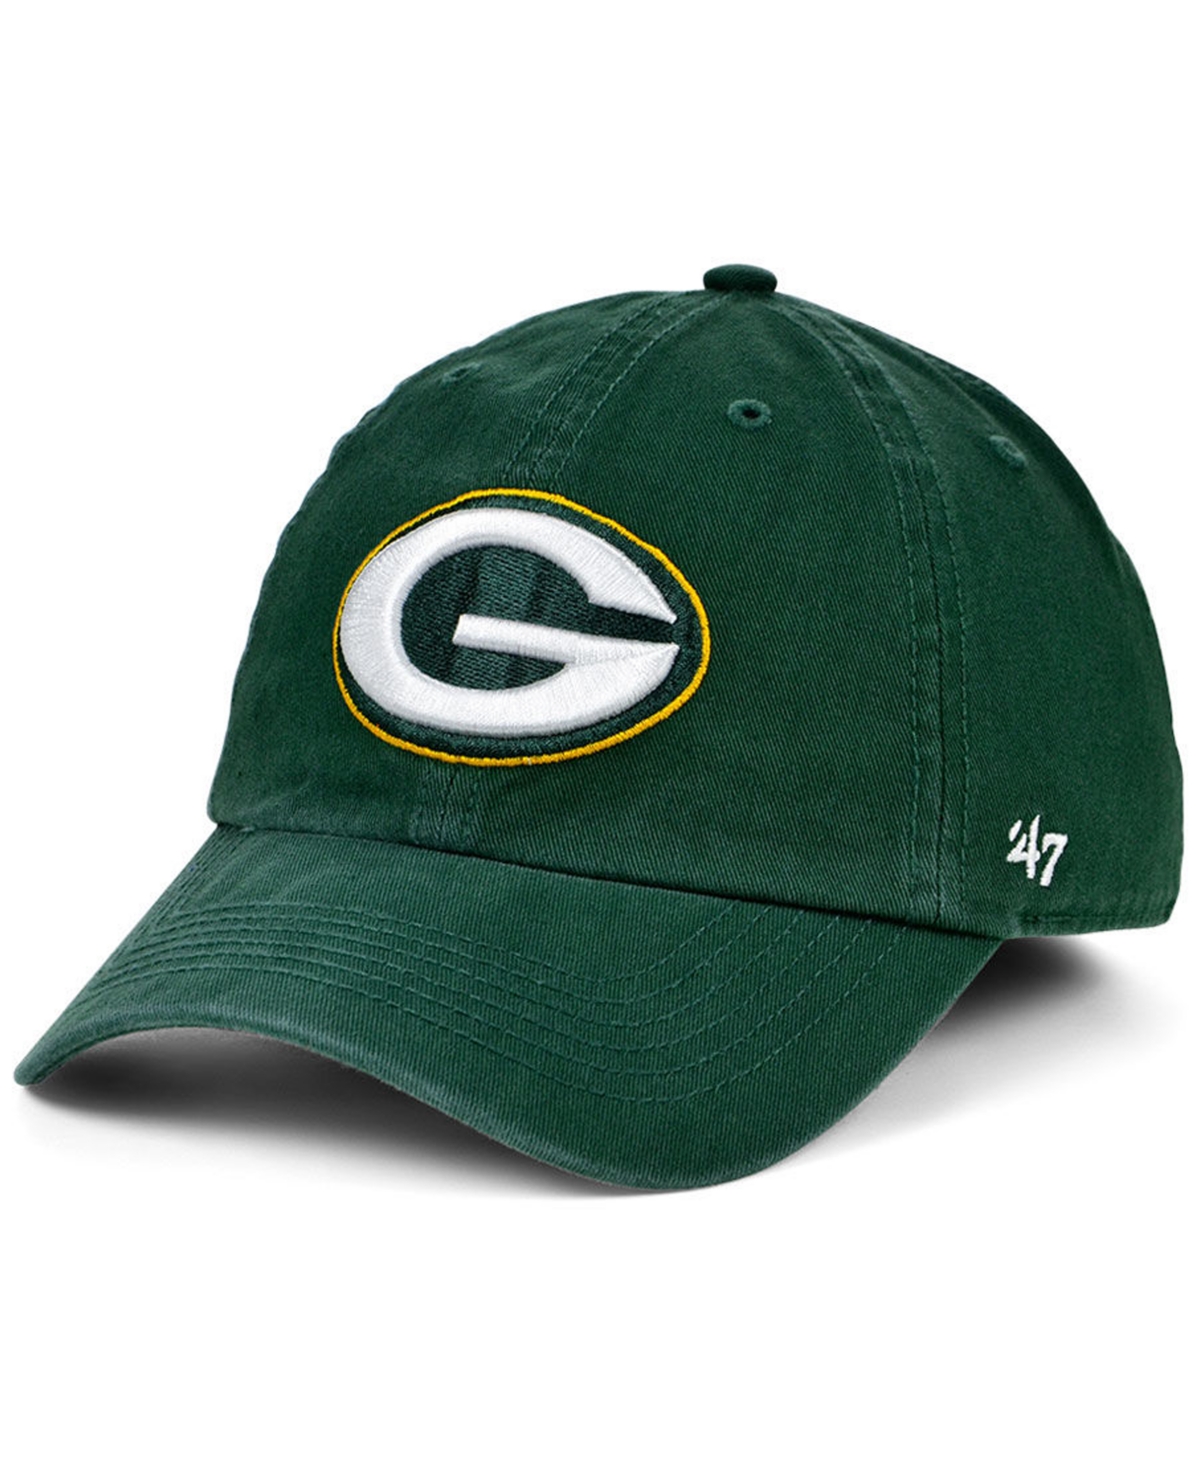 47 Brand Green Bay Packers Classic Franchise Cap